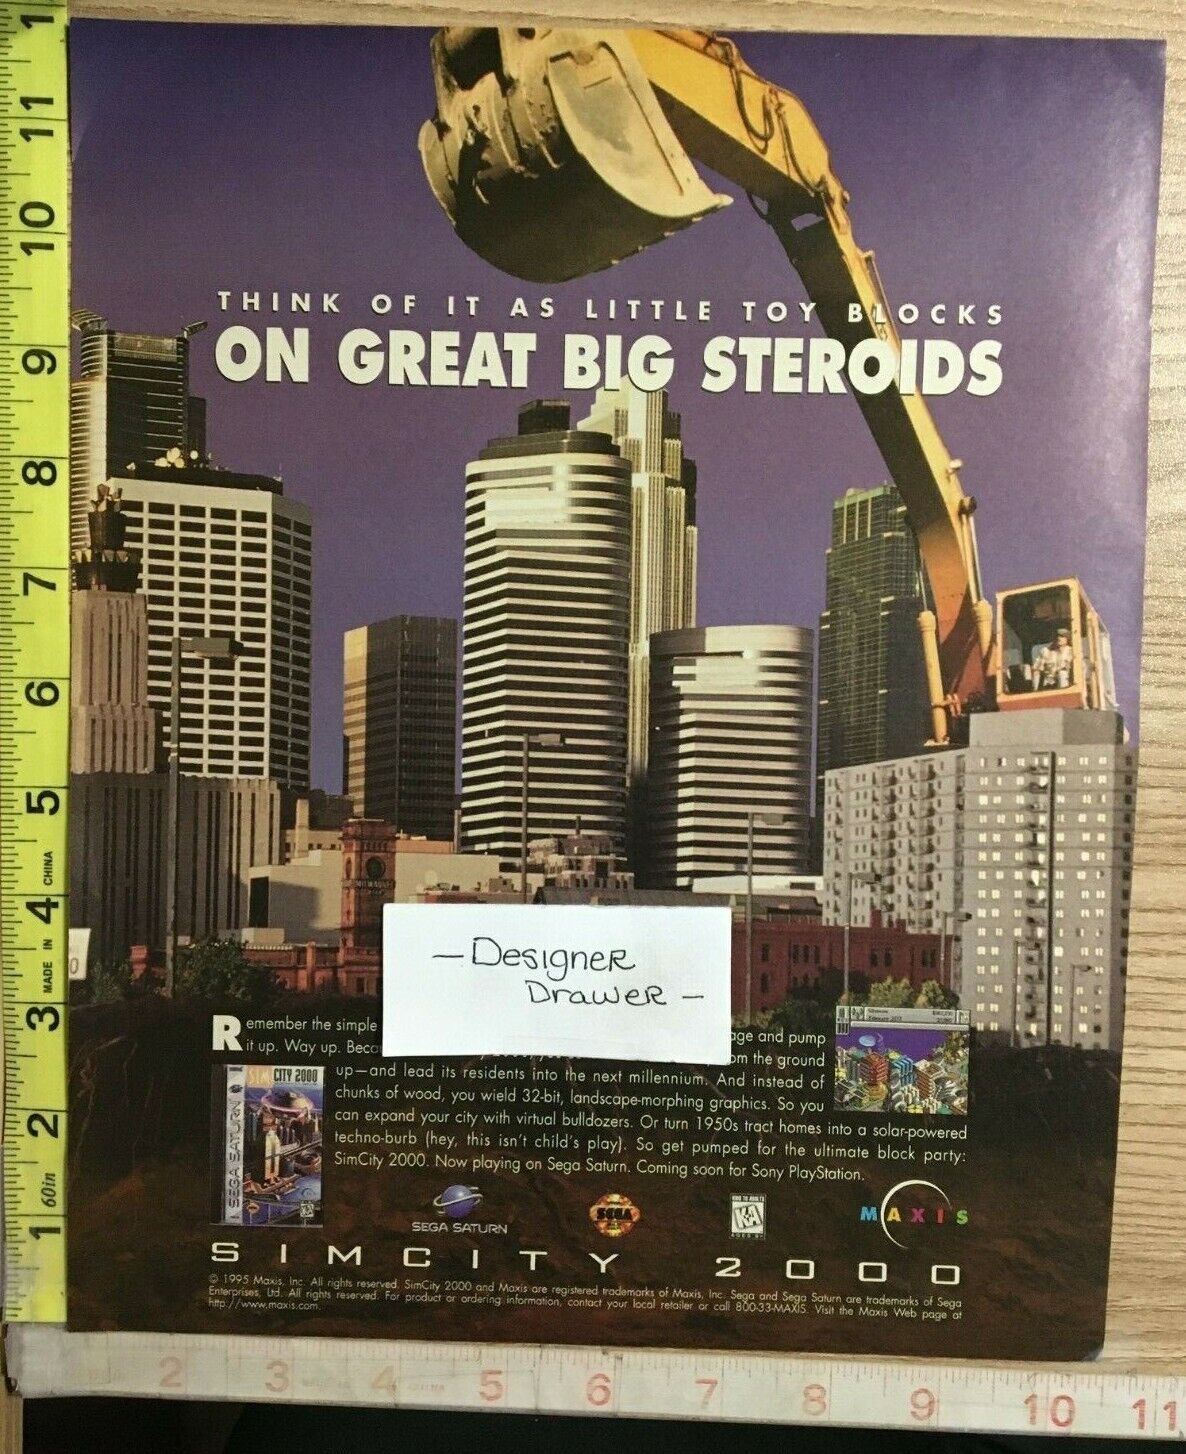 Sim City Video Game 2000 Print Ad: On Great Big Steroids